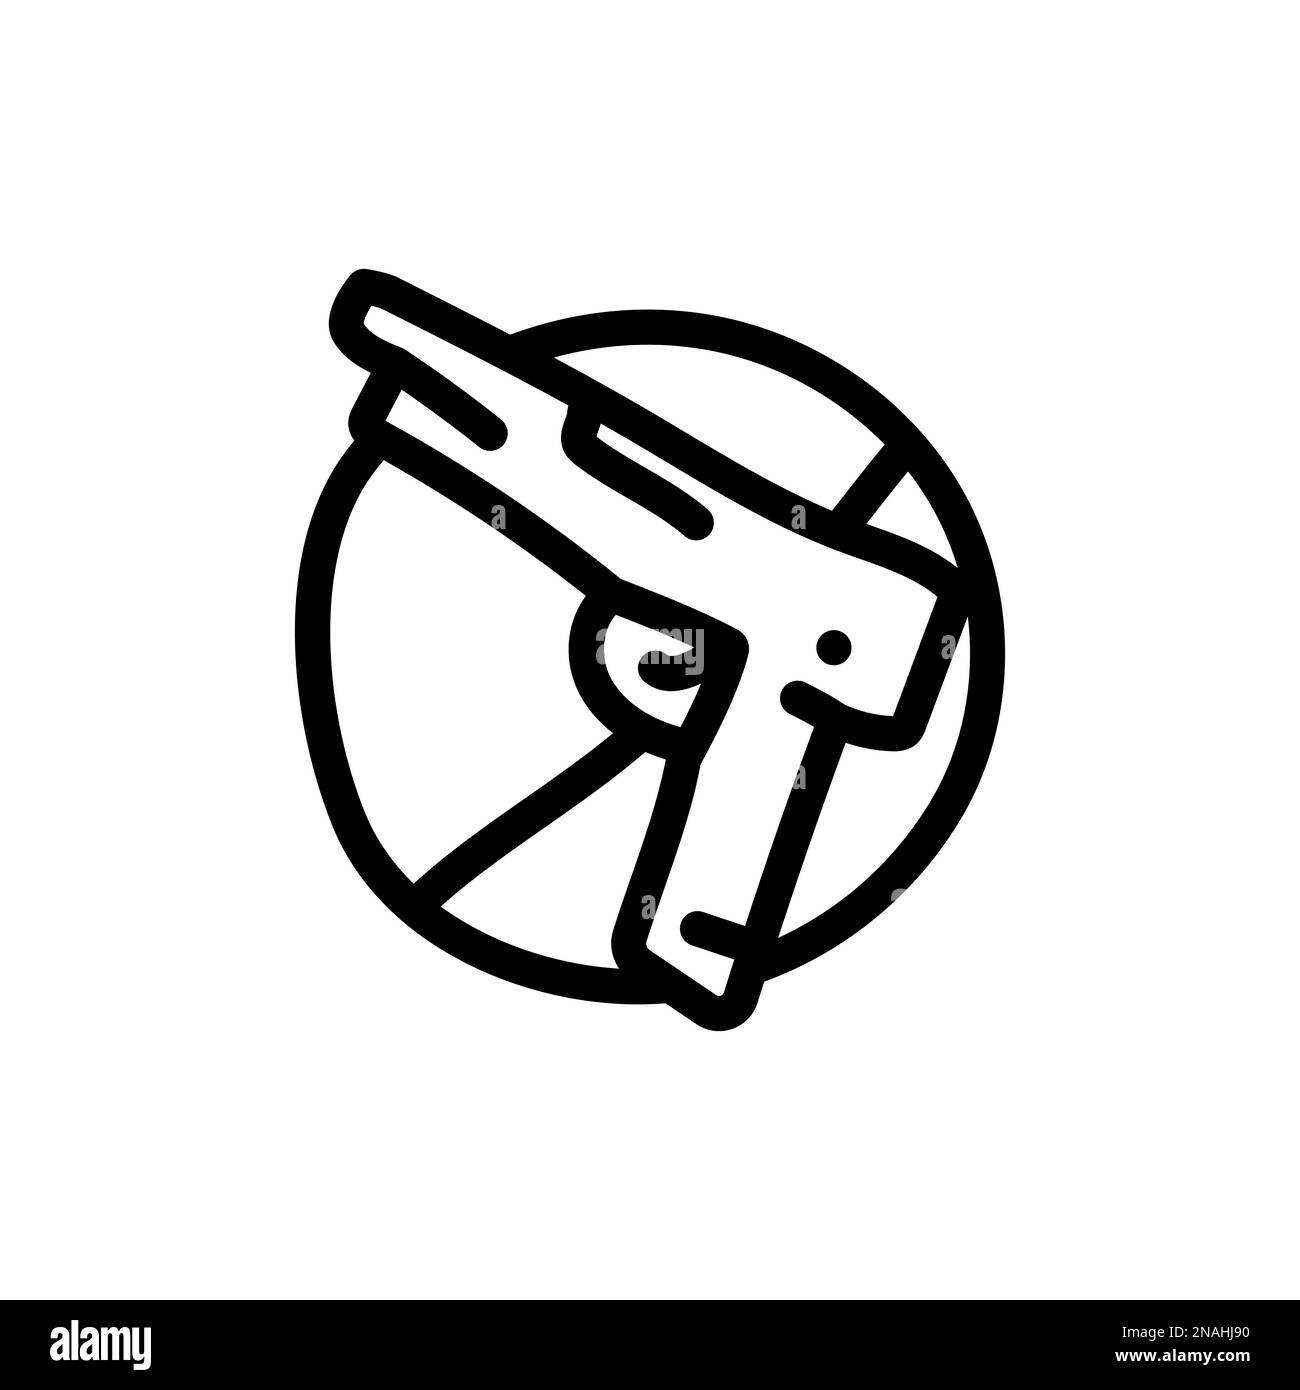 Simple vector icons. Flat illustration on a theme pistol Stock Vector